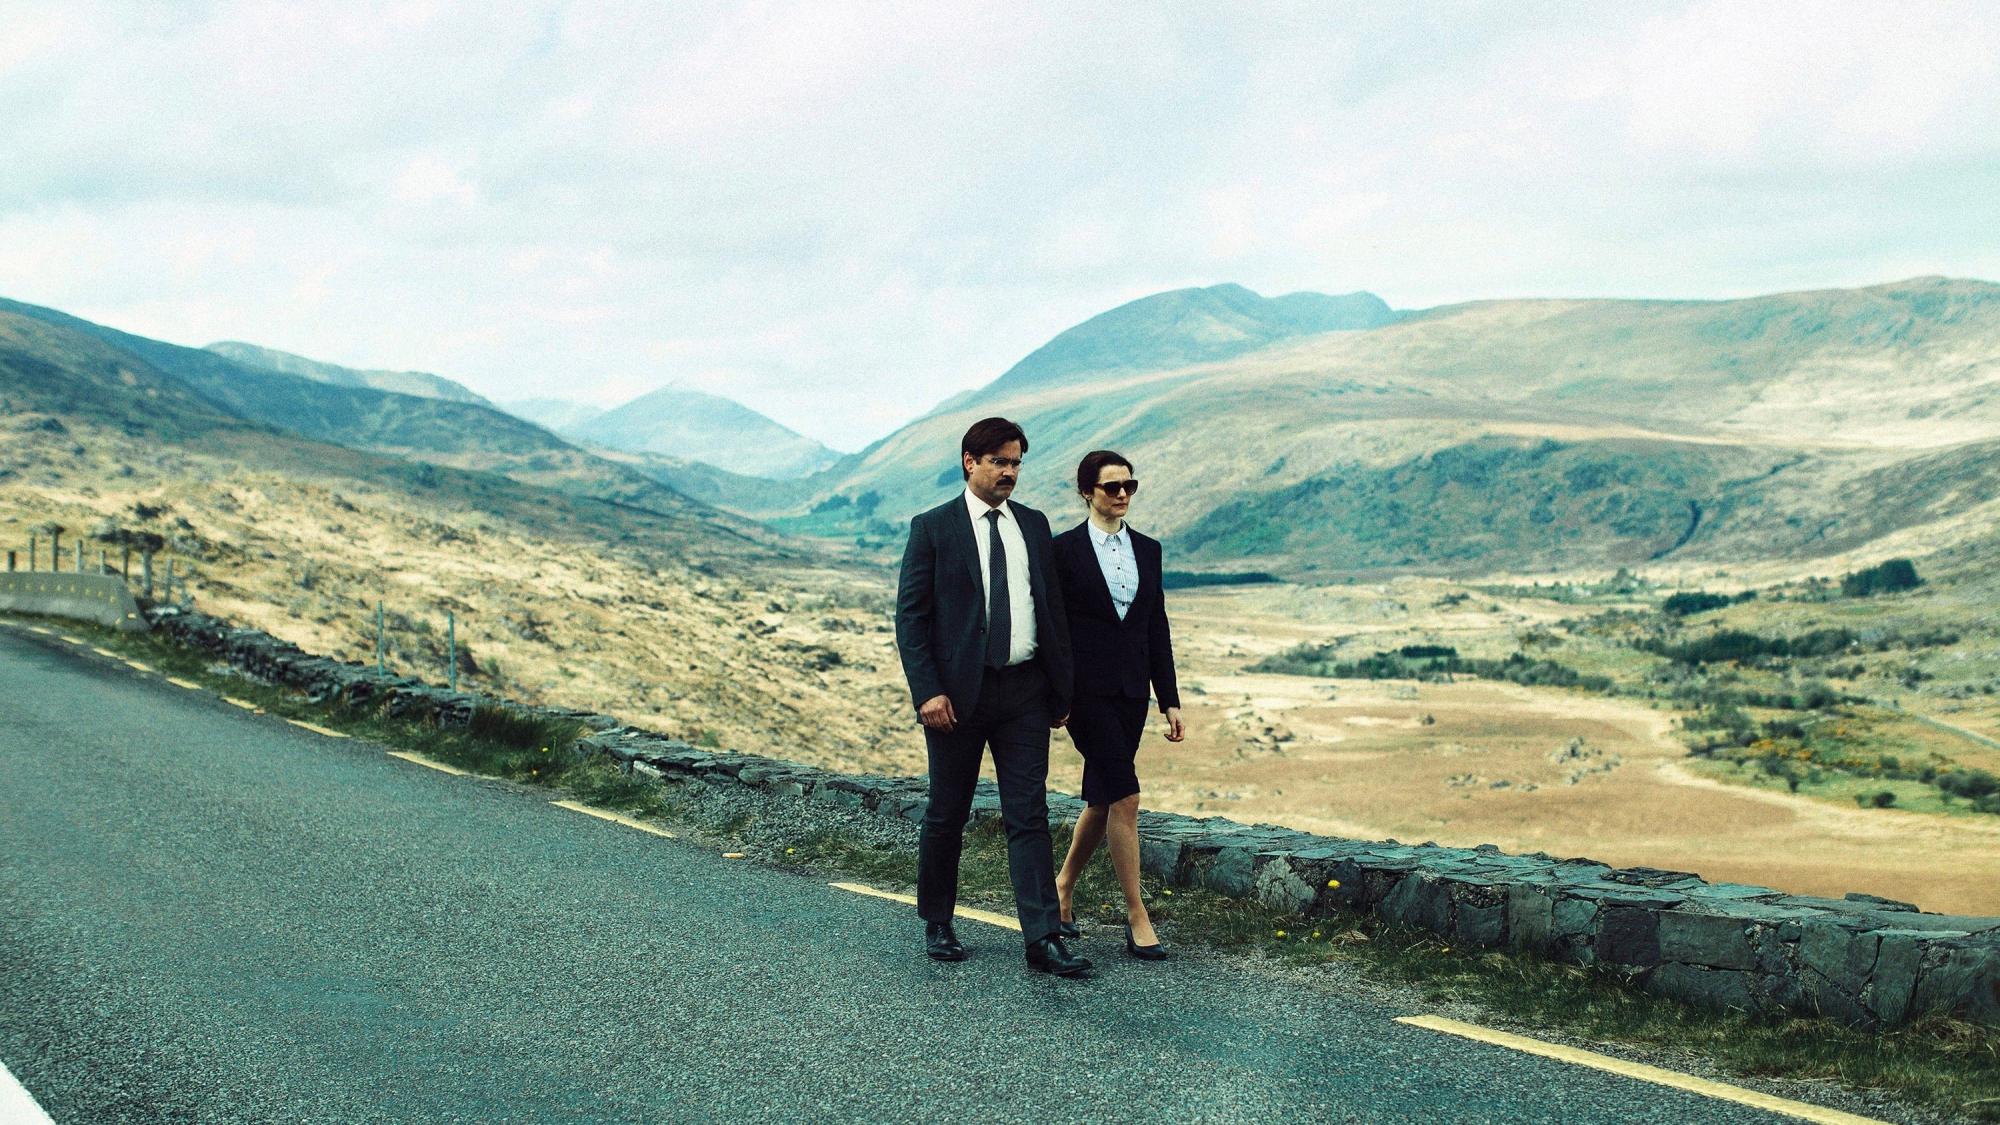 Backdrop Image for The Lobster